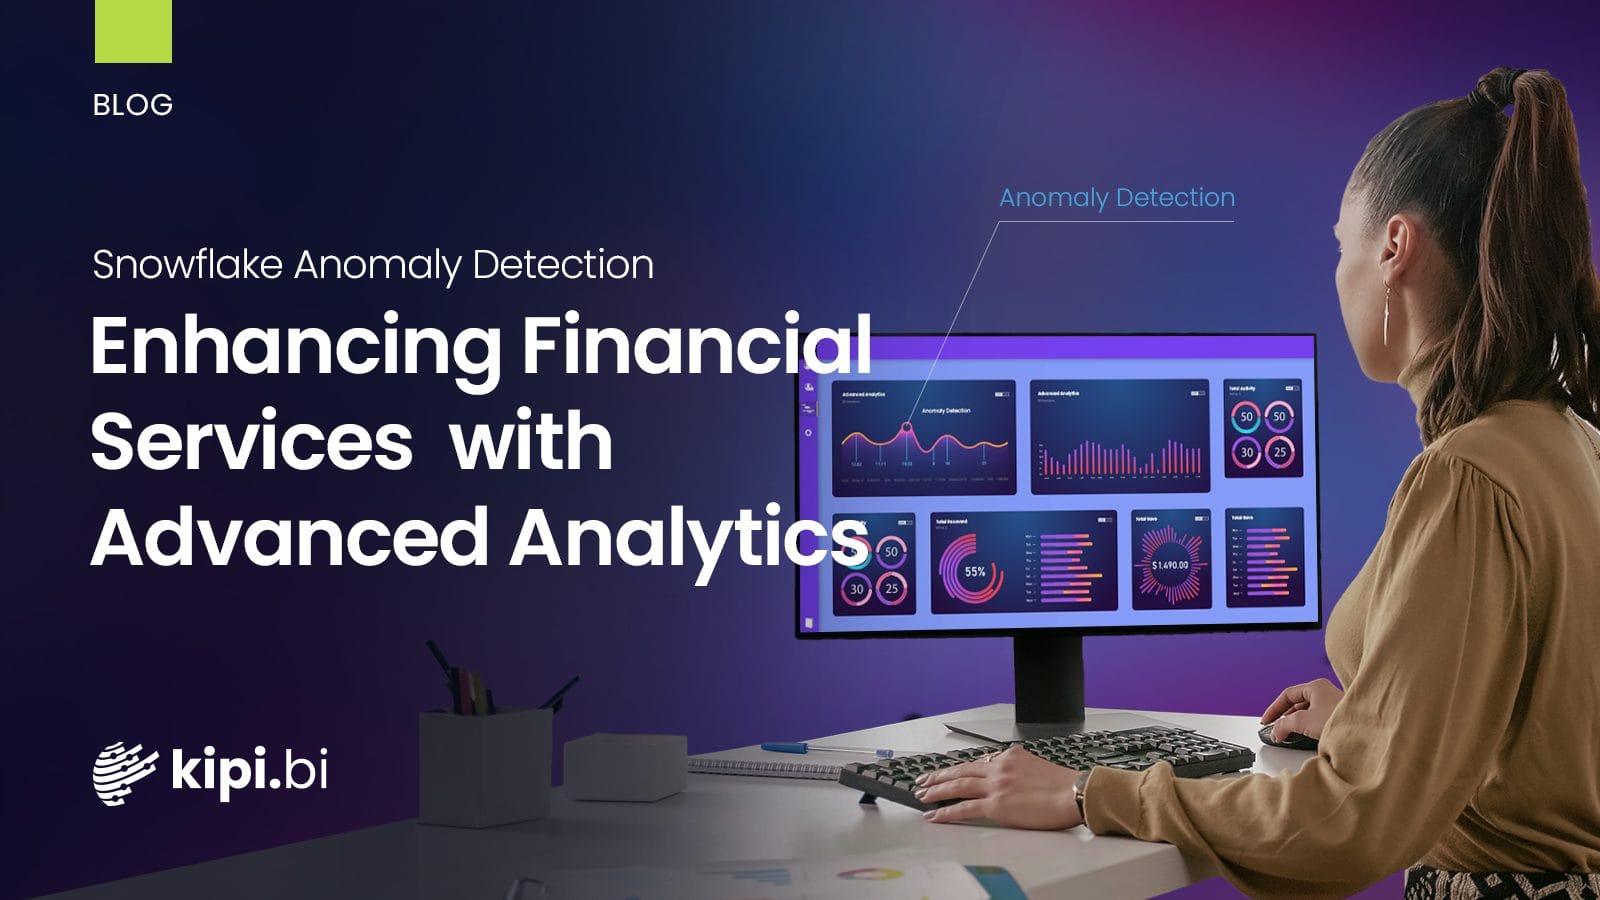 Snowflake’s Anomaly Detection: Enhancing Financial Services with Advanced Analytics